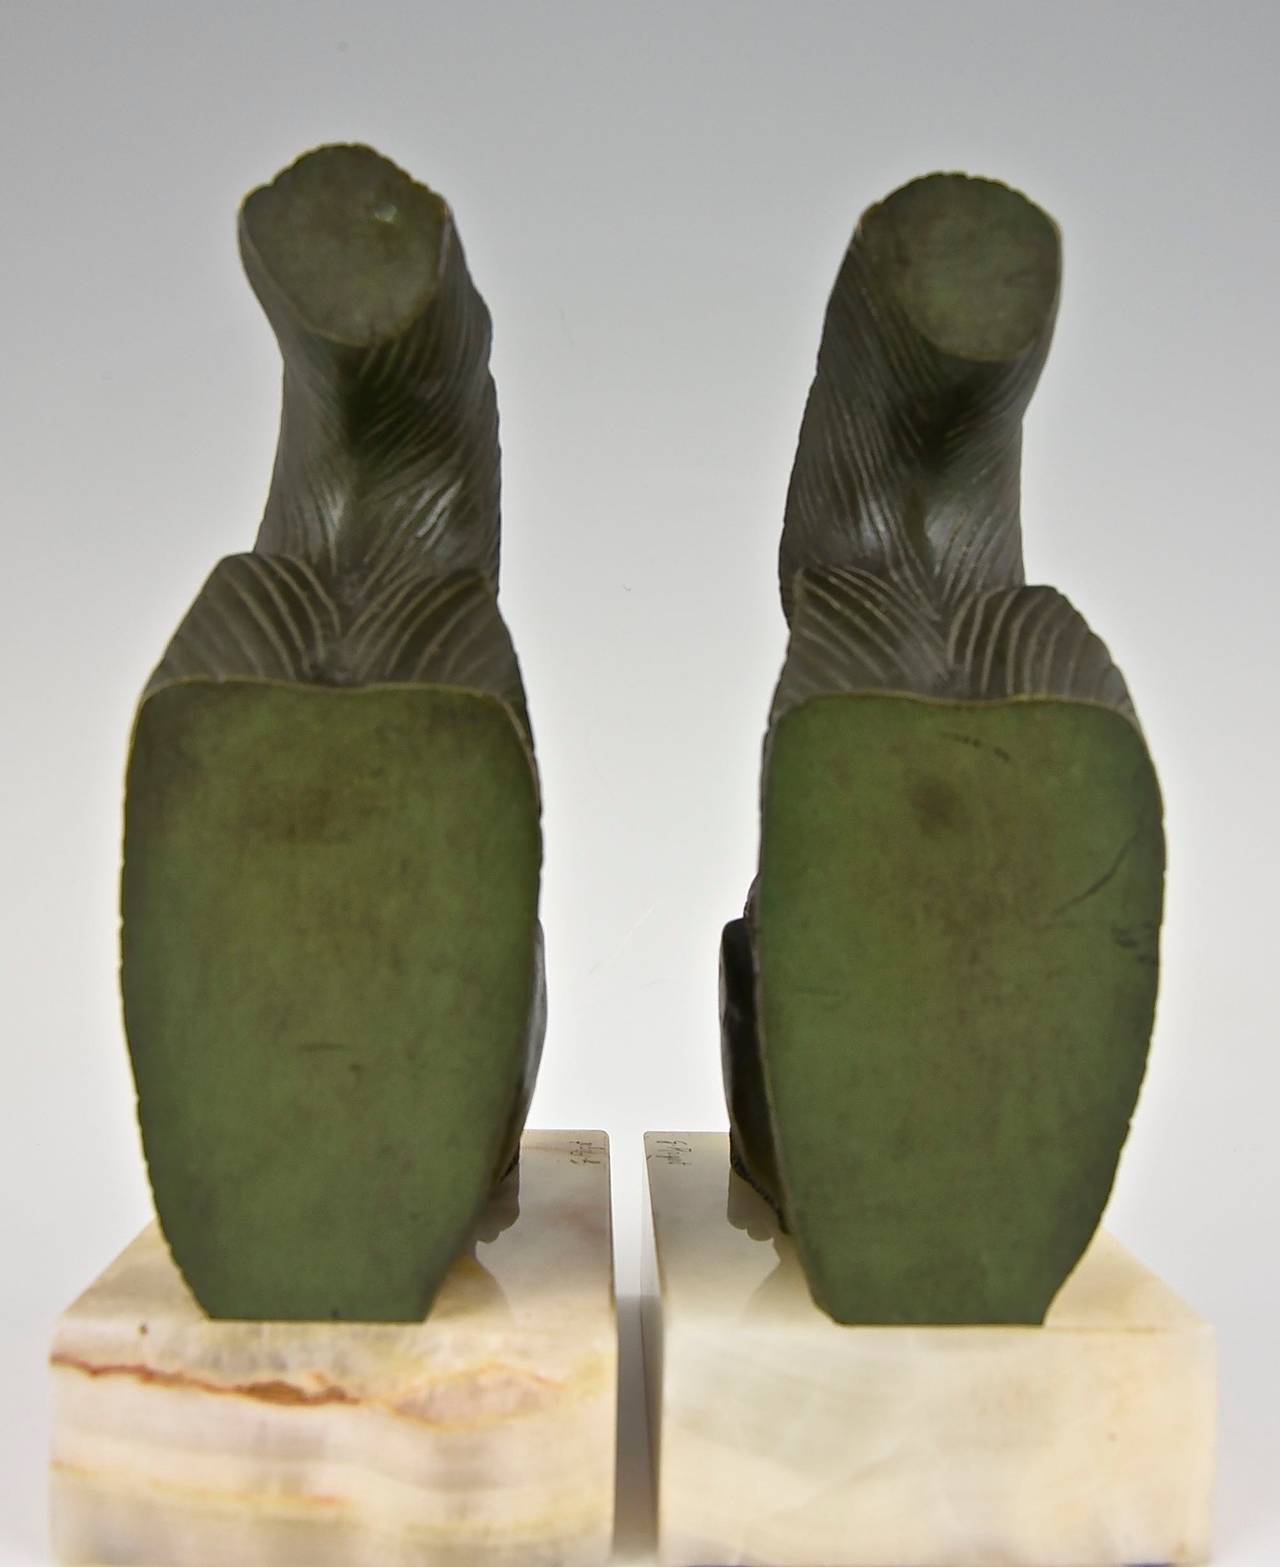 Art Deco bronze squirrel bookends.
Artist:  Georges Rigot.
Signature: G. Rigot.
Style:  Art Deco.
Date:  1930.
Material: Green patinated bronze.  Onyx bases.
Origin:  France.
Size of one:  
H. 7.1 inch x L. 3.8 inch x W. 3.8 inch.
H. 18 cm.